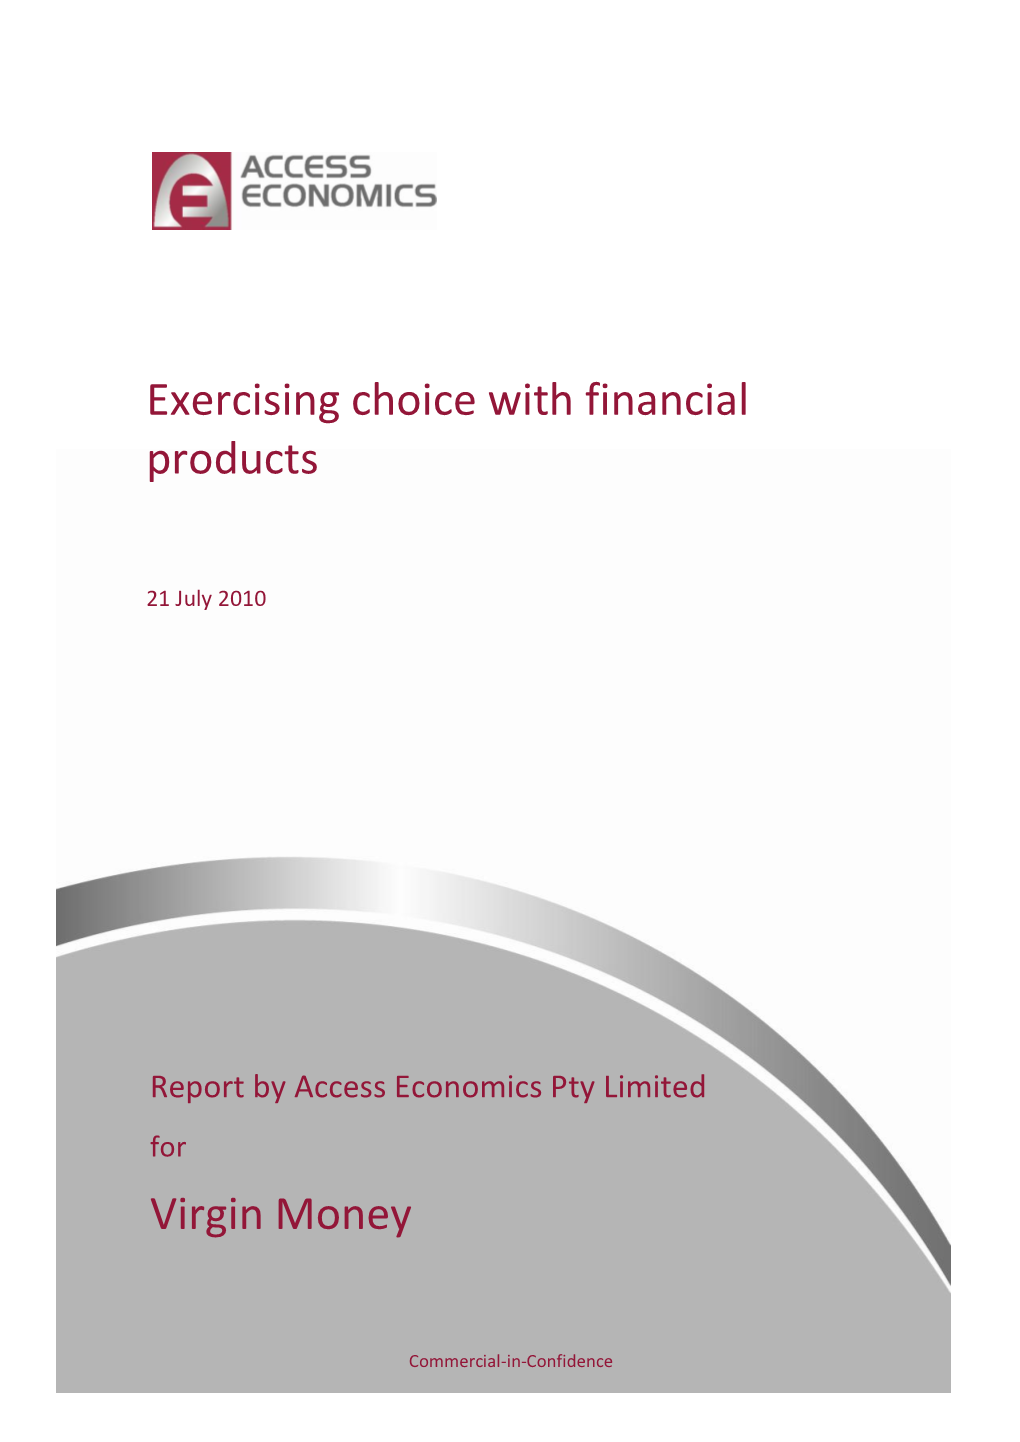 Exercising Choice with Financial Products Virgin Money